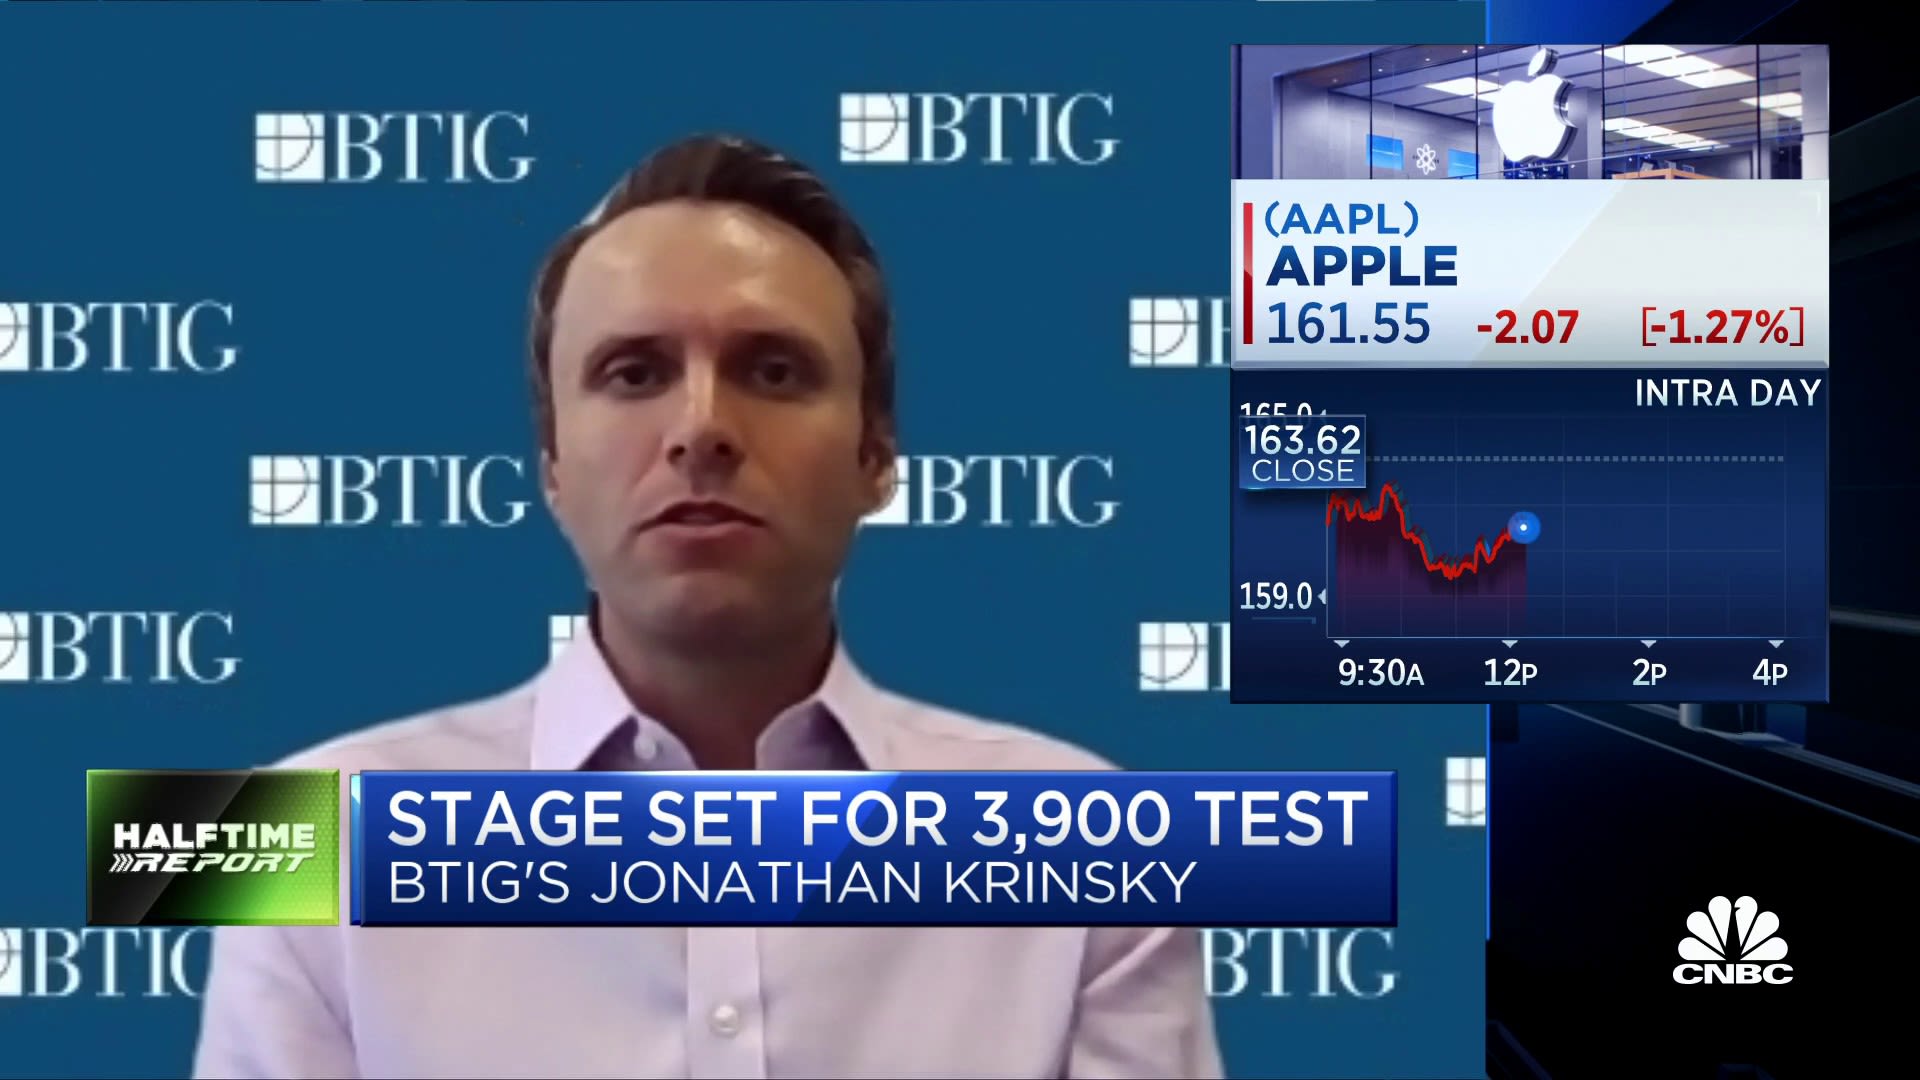 Apple is a risky stock that may cause headwinds for the S&P, says BTIG's Jonathan Krinsky